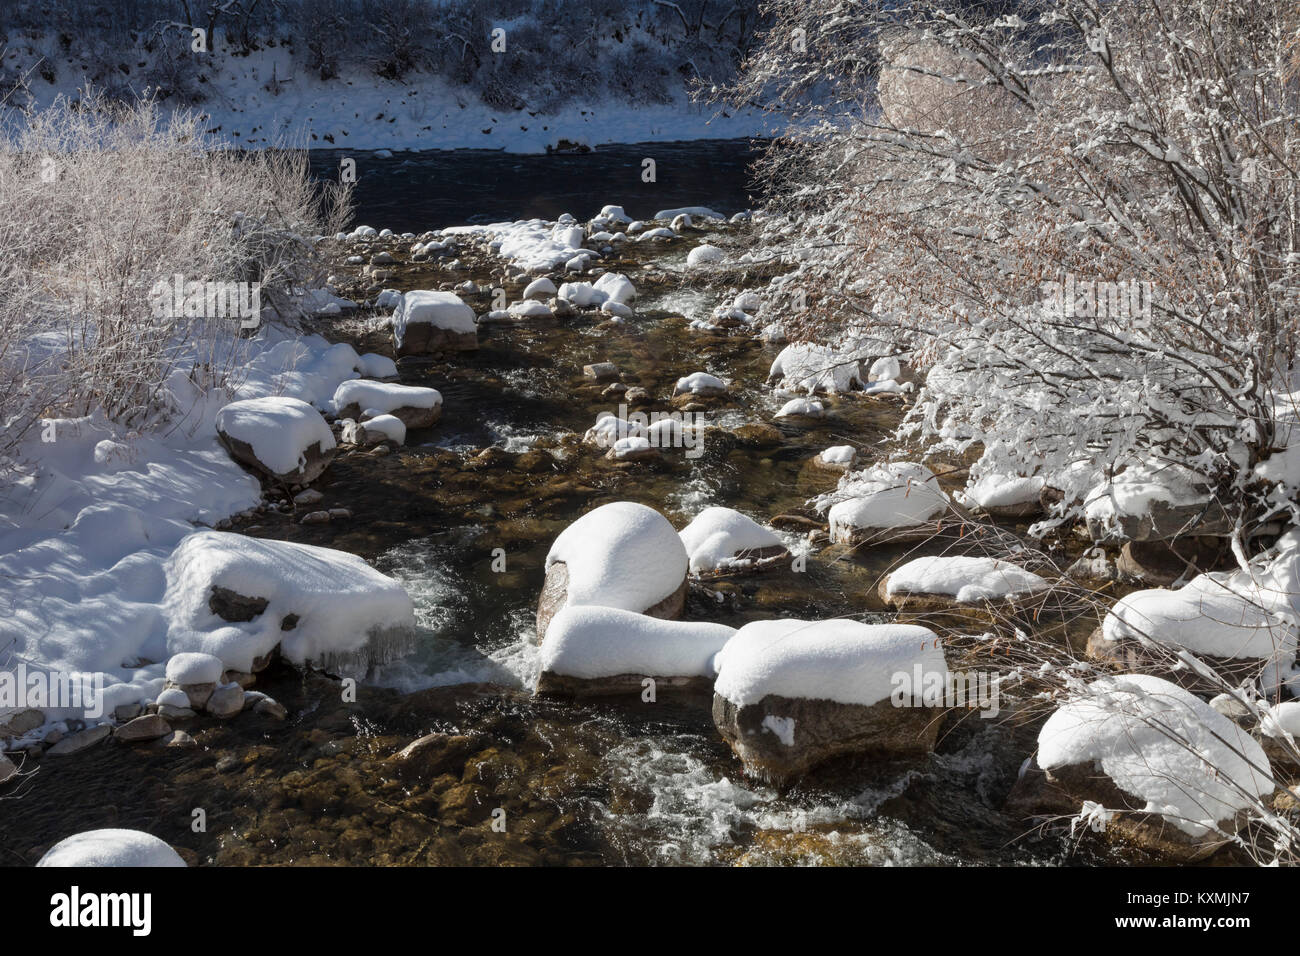 Glenwood Springs, Colorado - Grizzly Creek confluisce nel fiume Colorado in inverno a Glenwood Canyon. Foto Stock